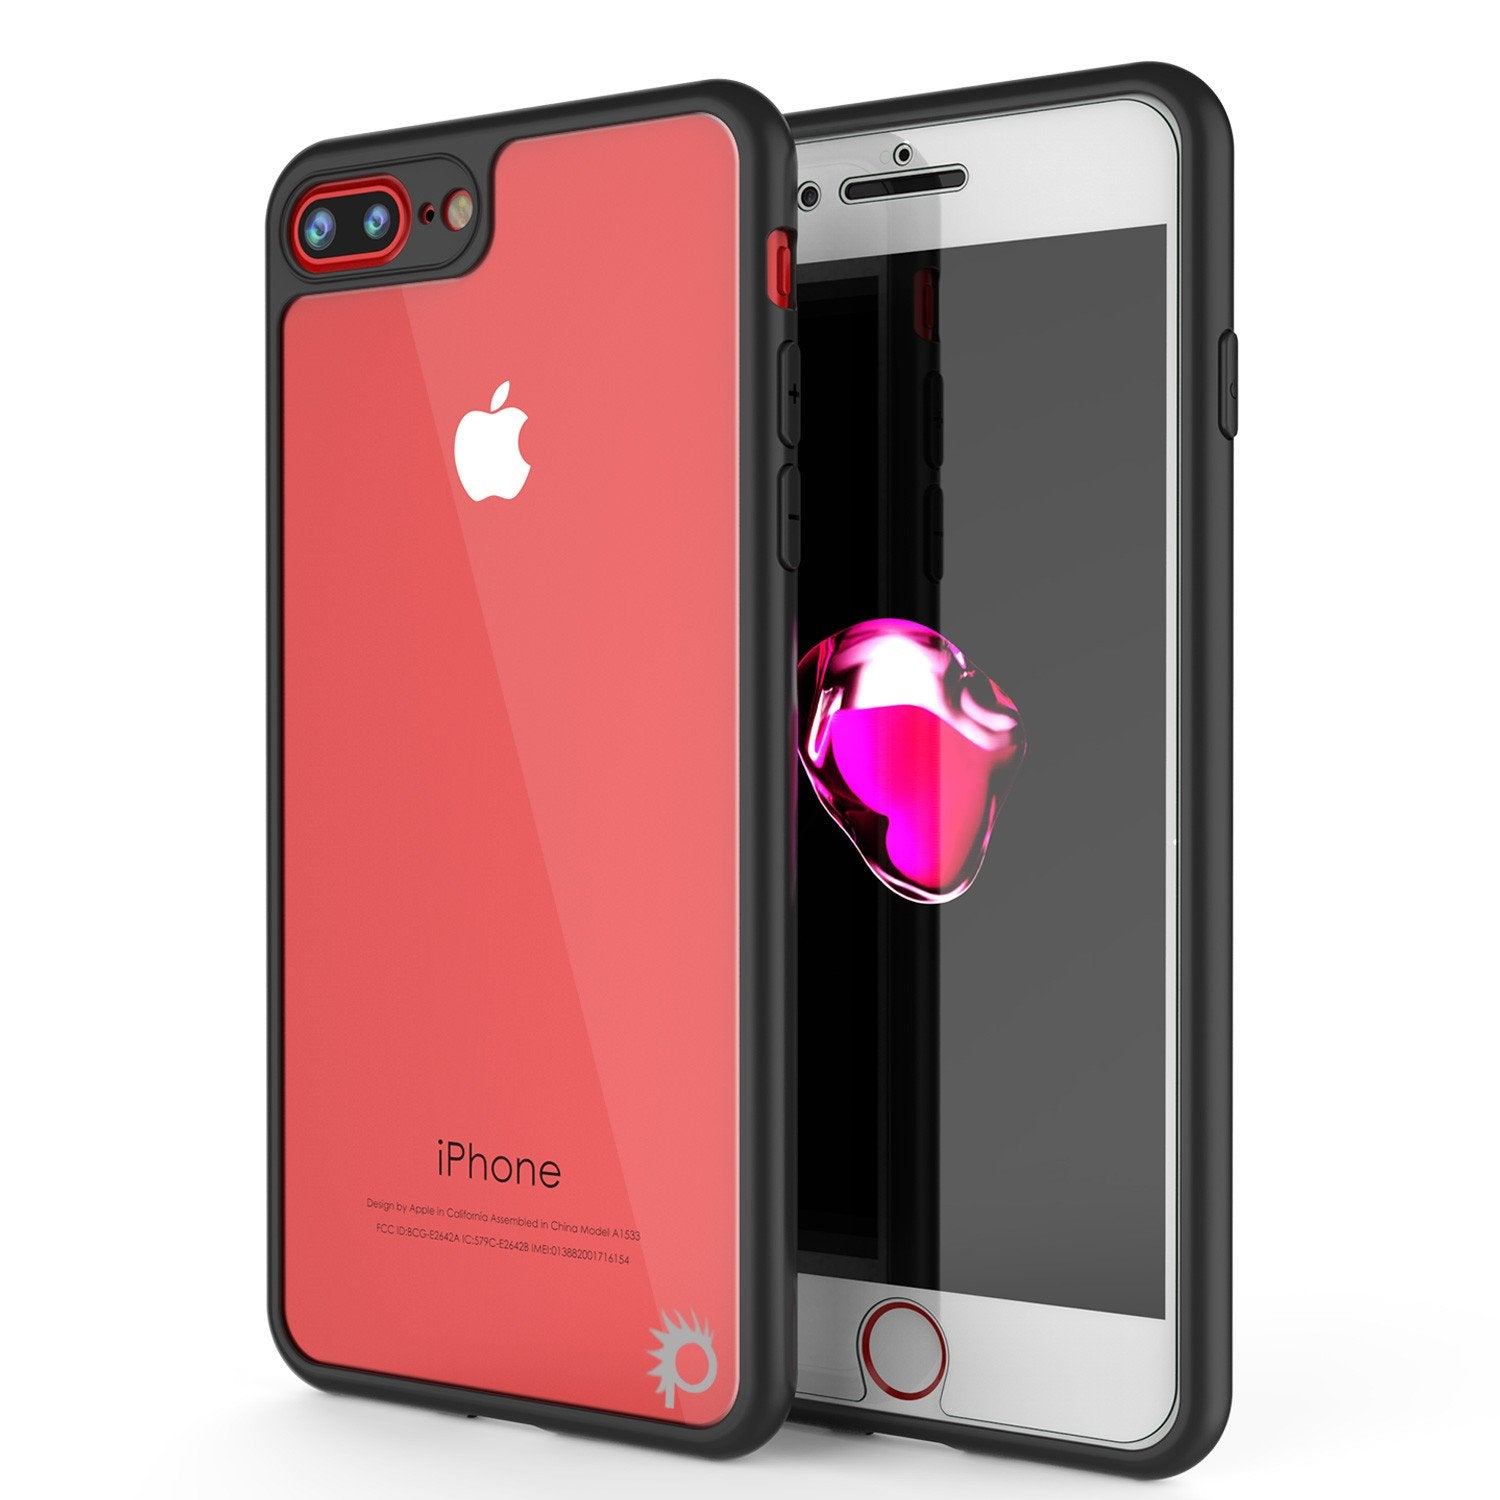 iPhone 7+ Plus Case, Punkcase [MASK Series] [BLACK] Full Body Hybrid Dual Layer TPU Cover W/ protective Tempered Glass Screen Protector